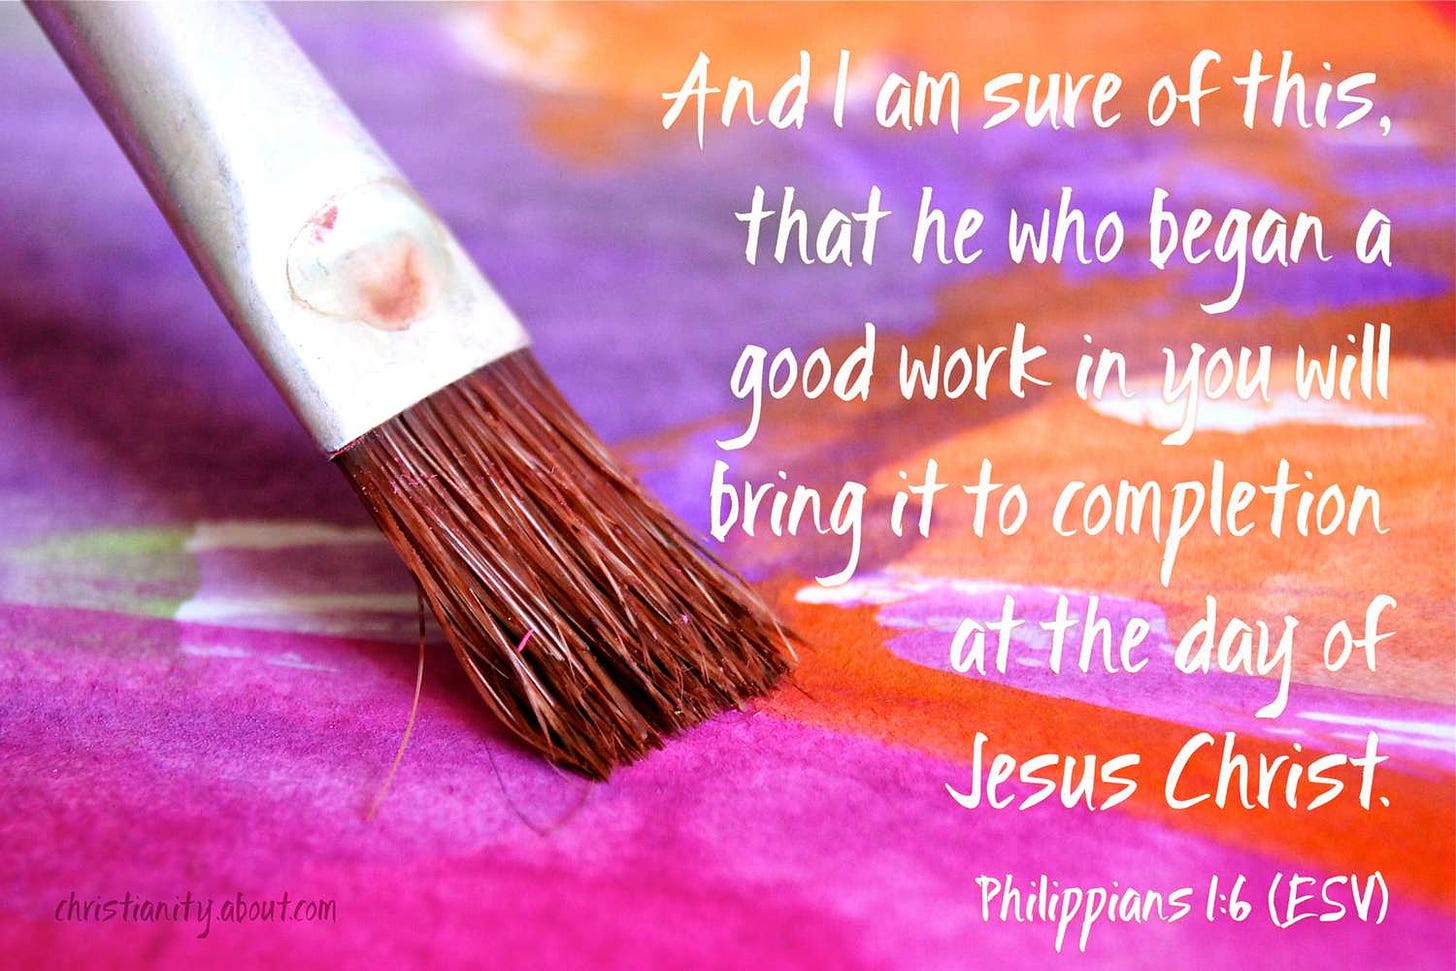 He Who Began a Good Work in You' Philippians 1:6